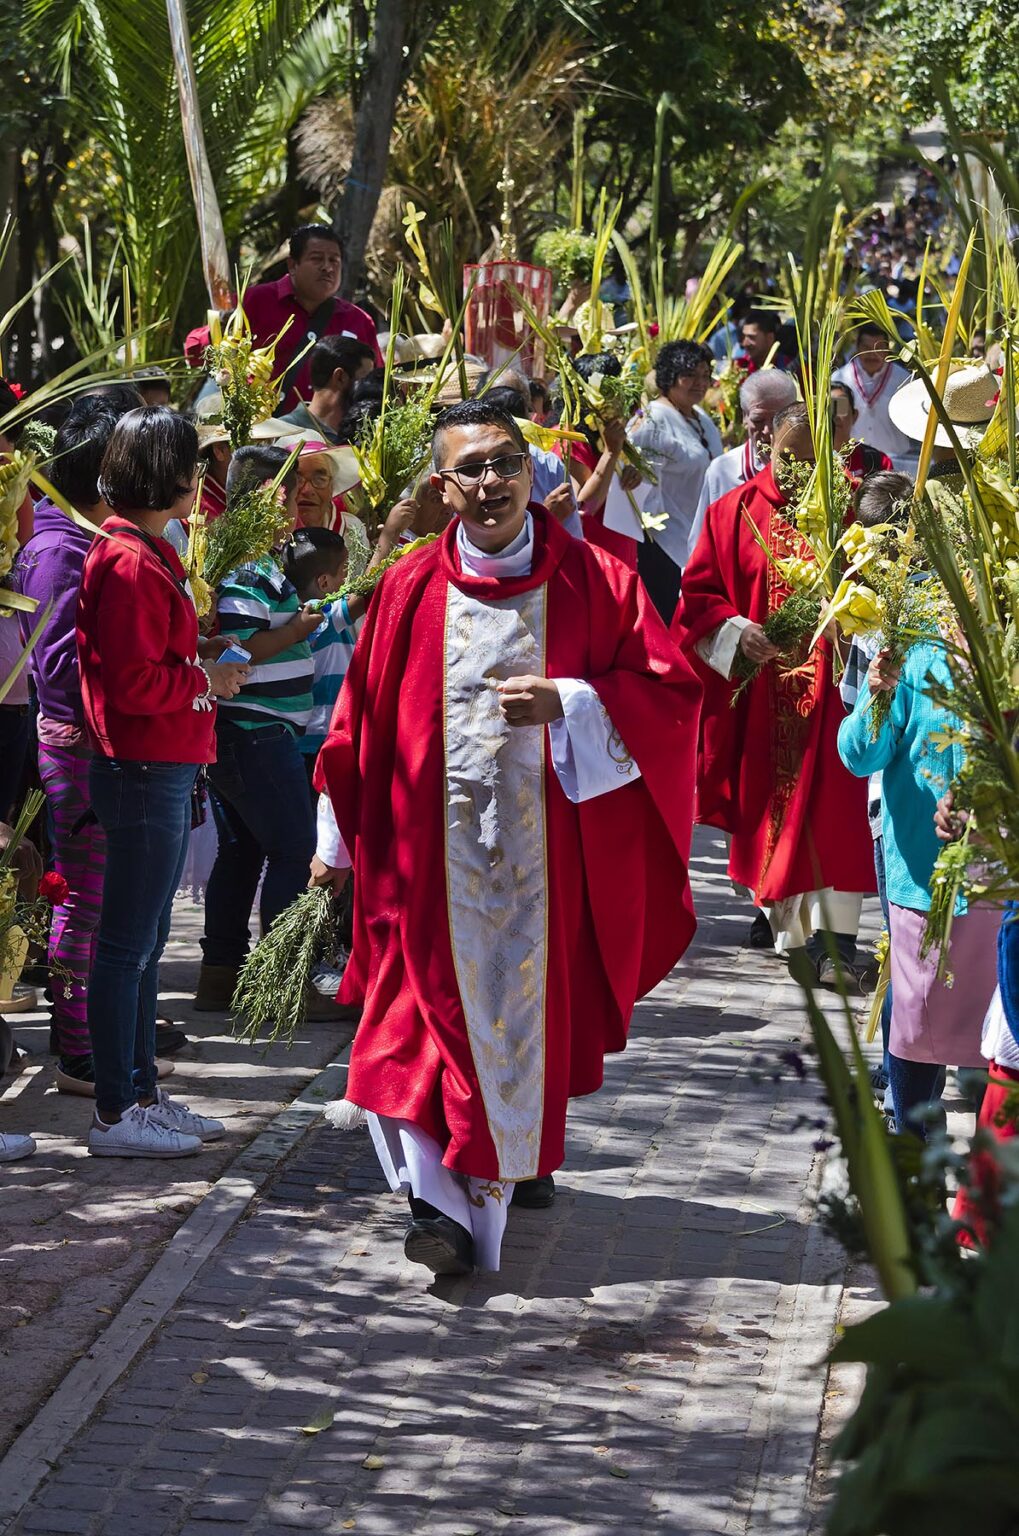 Mexicans line up for a blession at the start of the PALM SUNDAY procession from Parque Juarez to the Jardin - SAN MIGUEL DE ALLENDE, MEXICO